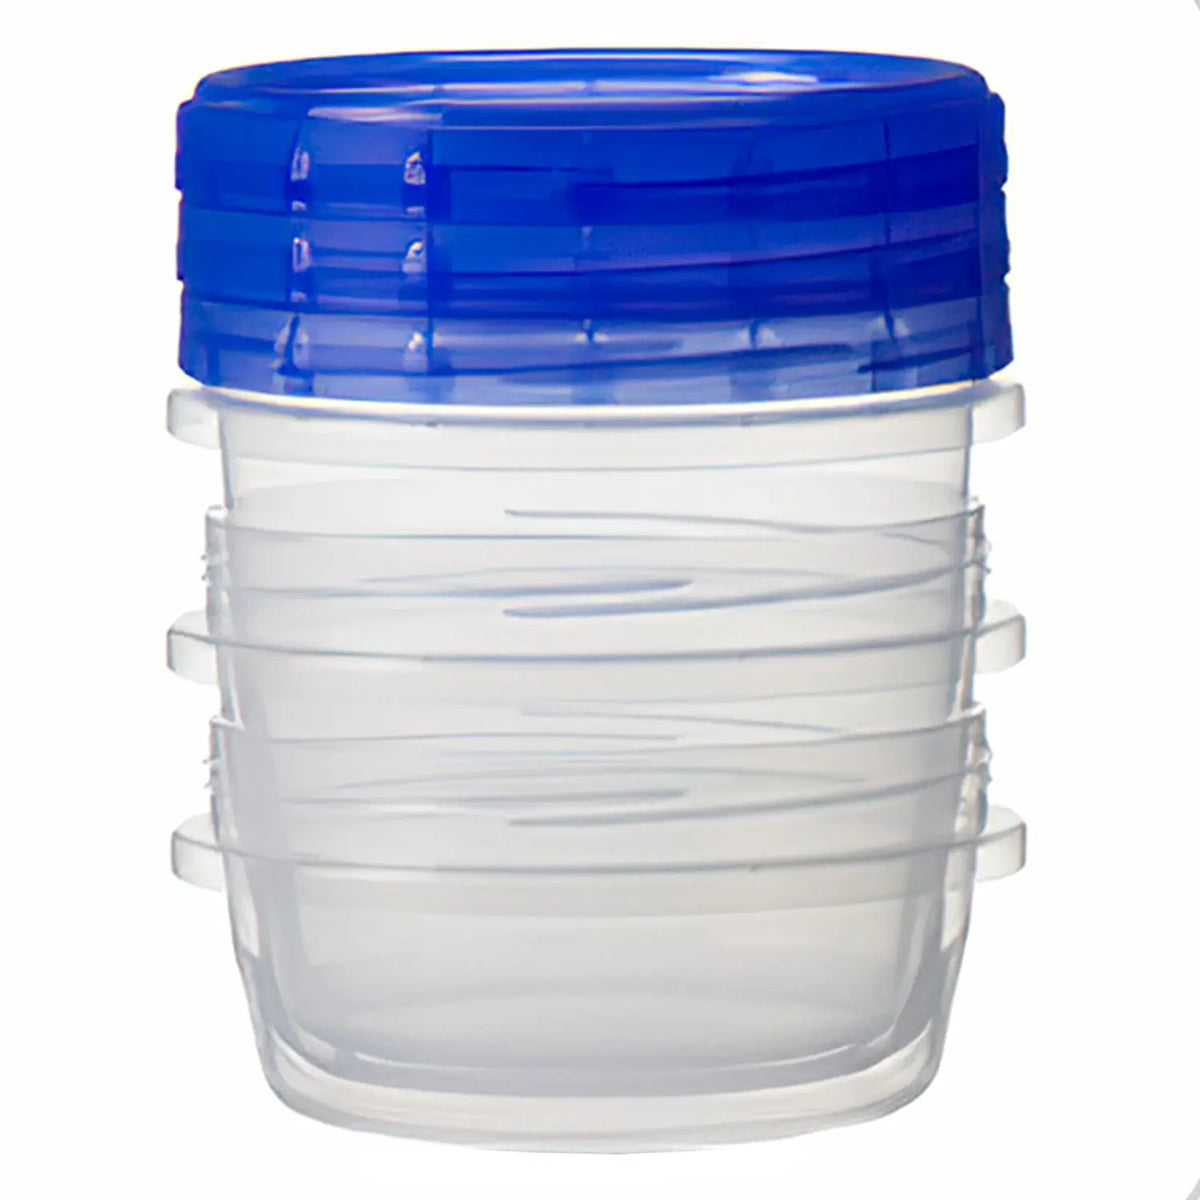 Plastic Freezer Containers for Food Storage, Twist Top Food Soup